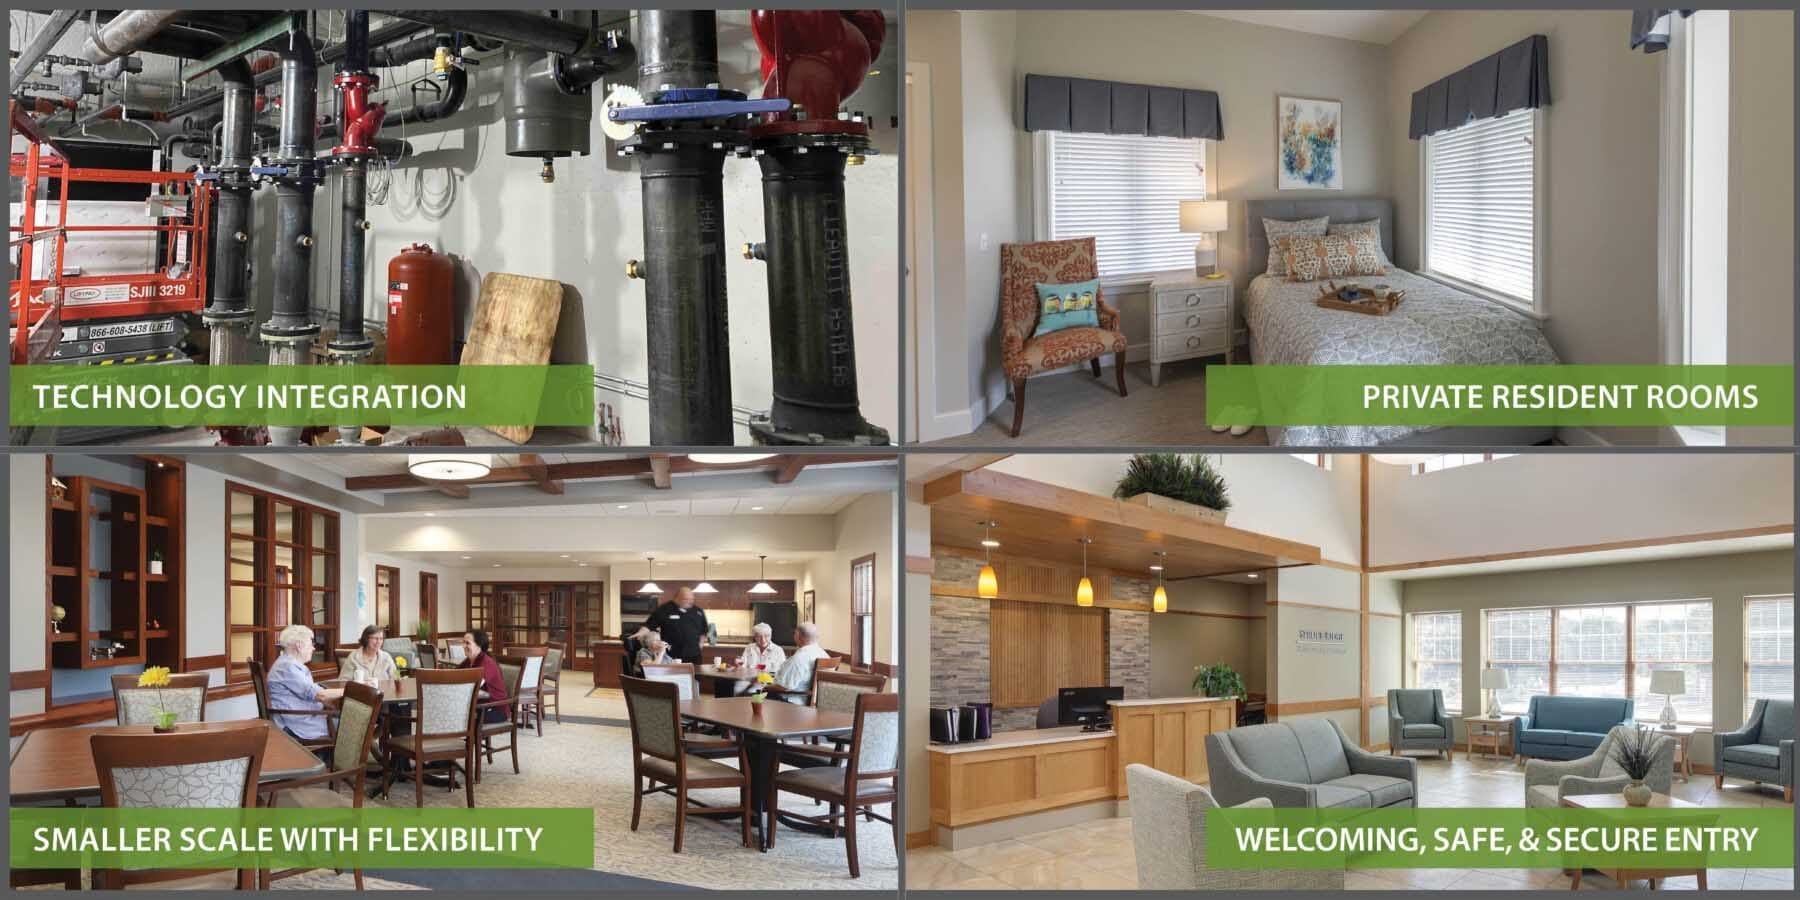 Senior Living Trends - Technology Integration, Private Resident Rooms, Smaller Scale with Flexibility, Welcoming, Safe and Secure Entry